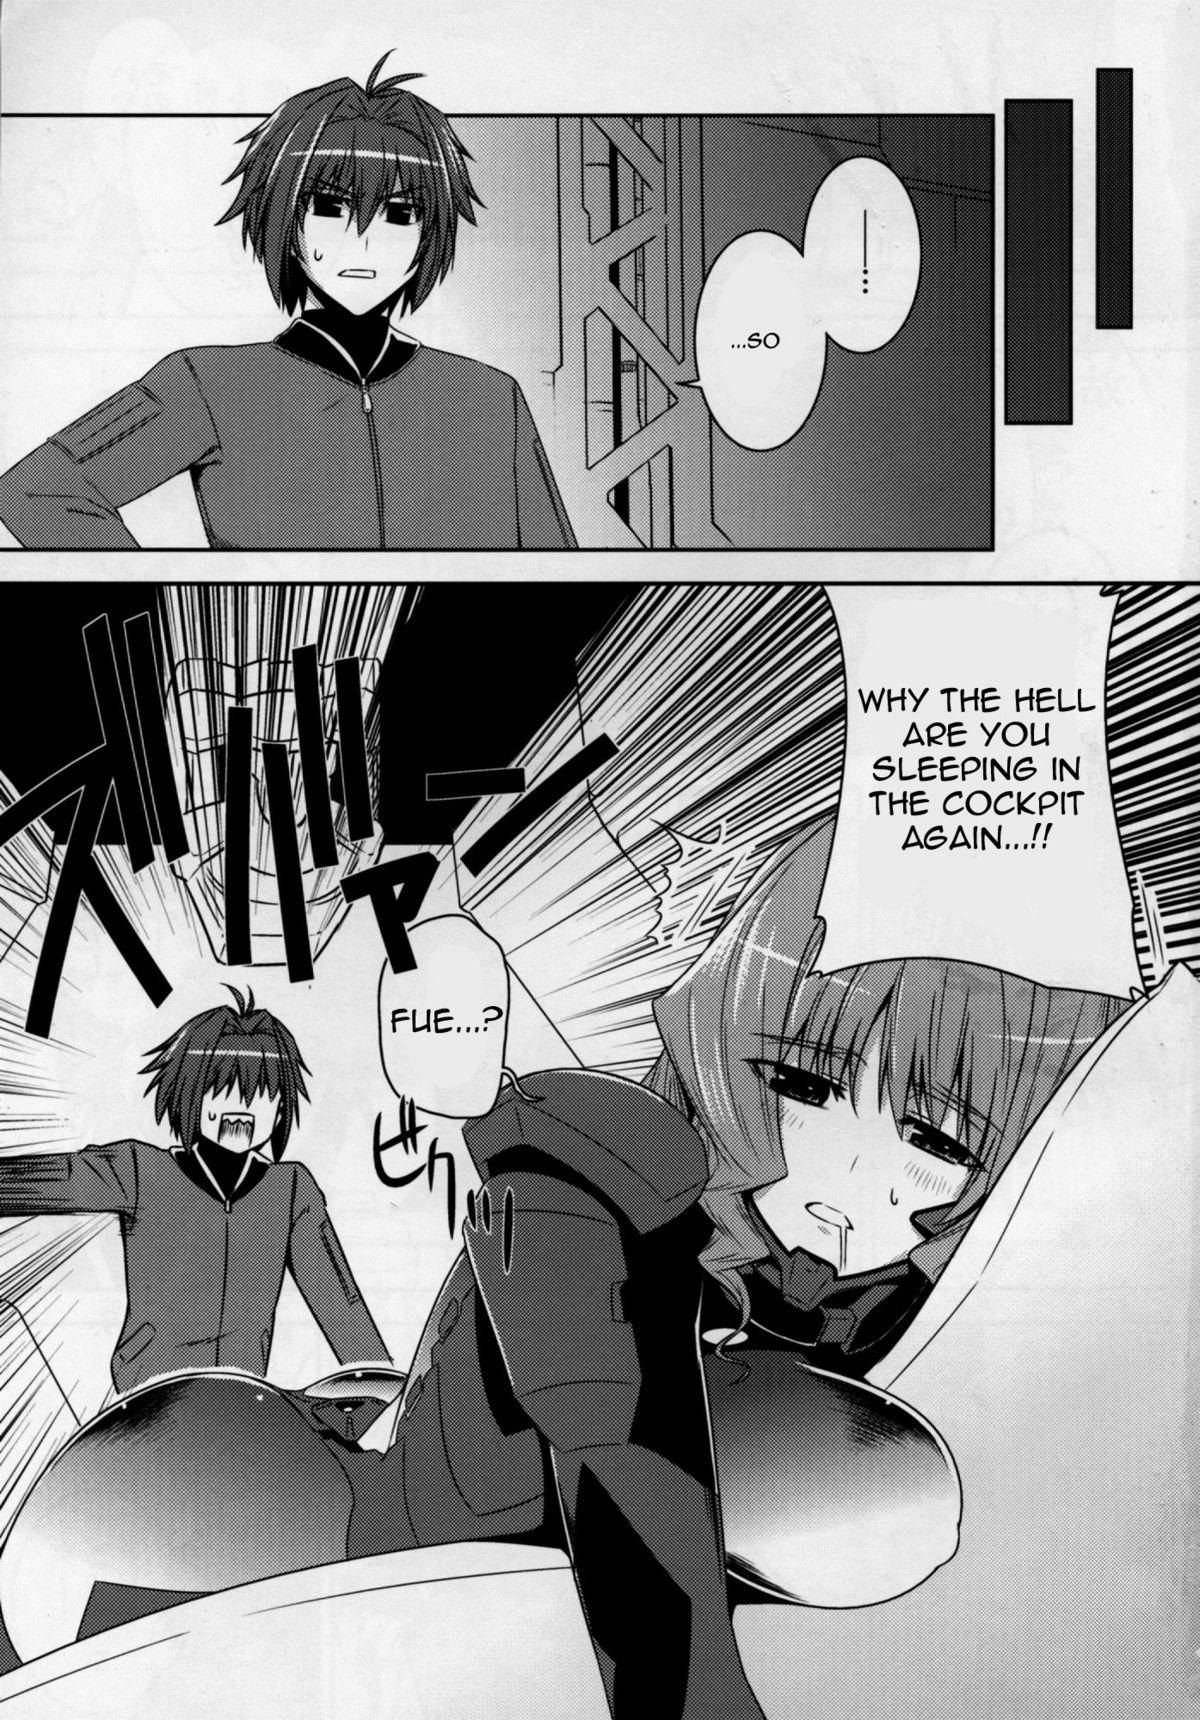 Riding Mad Dog - Muv-luv Infiel - Page 7